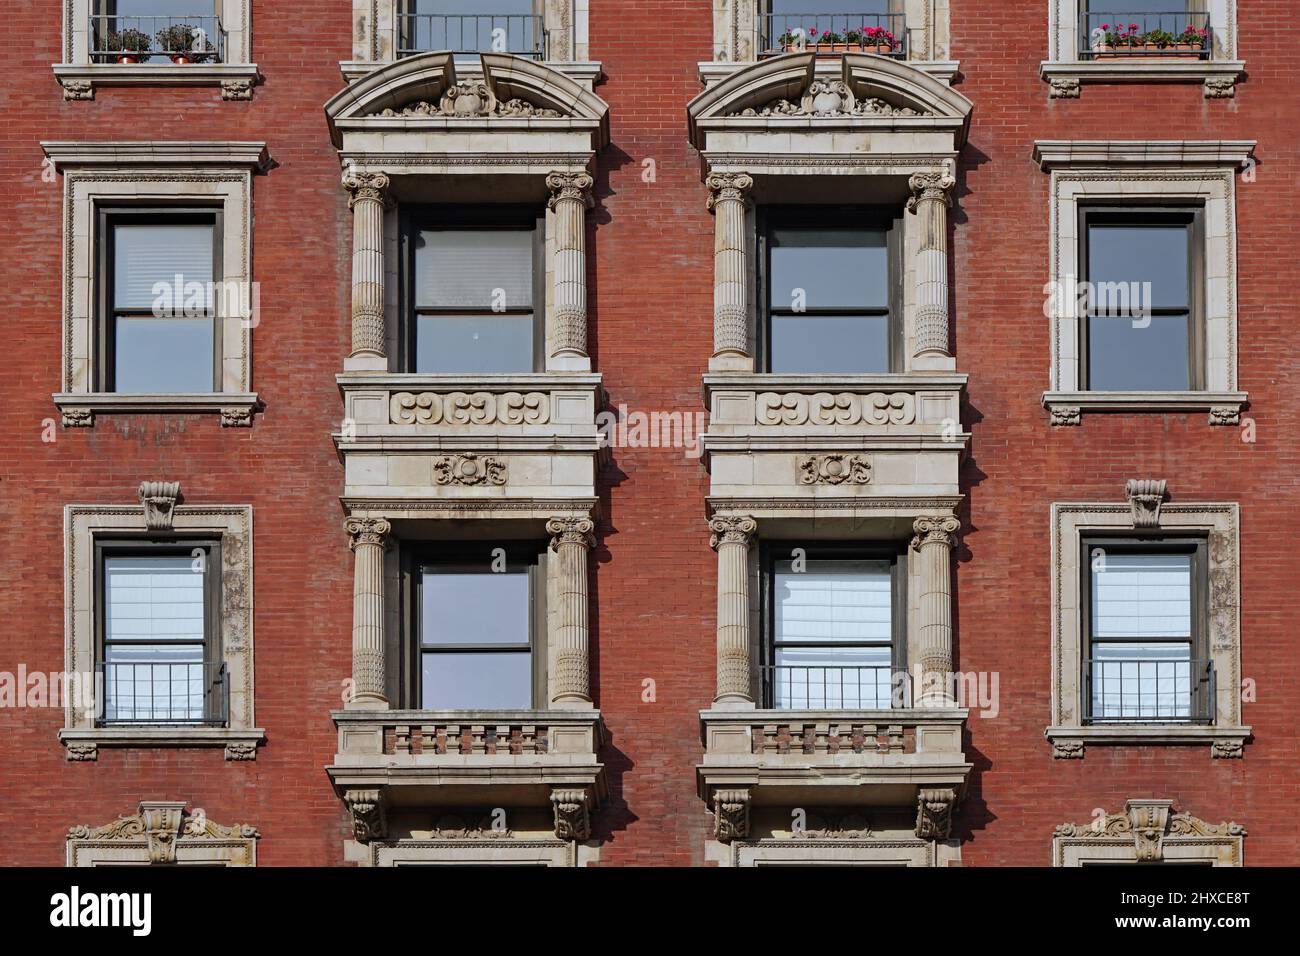 Facade of elegant baroque styled apartment building, Central Park West area of New York Stock Photo